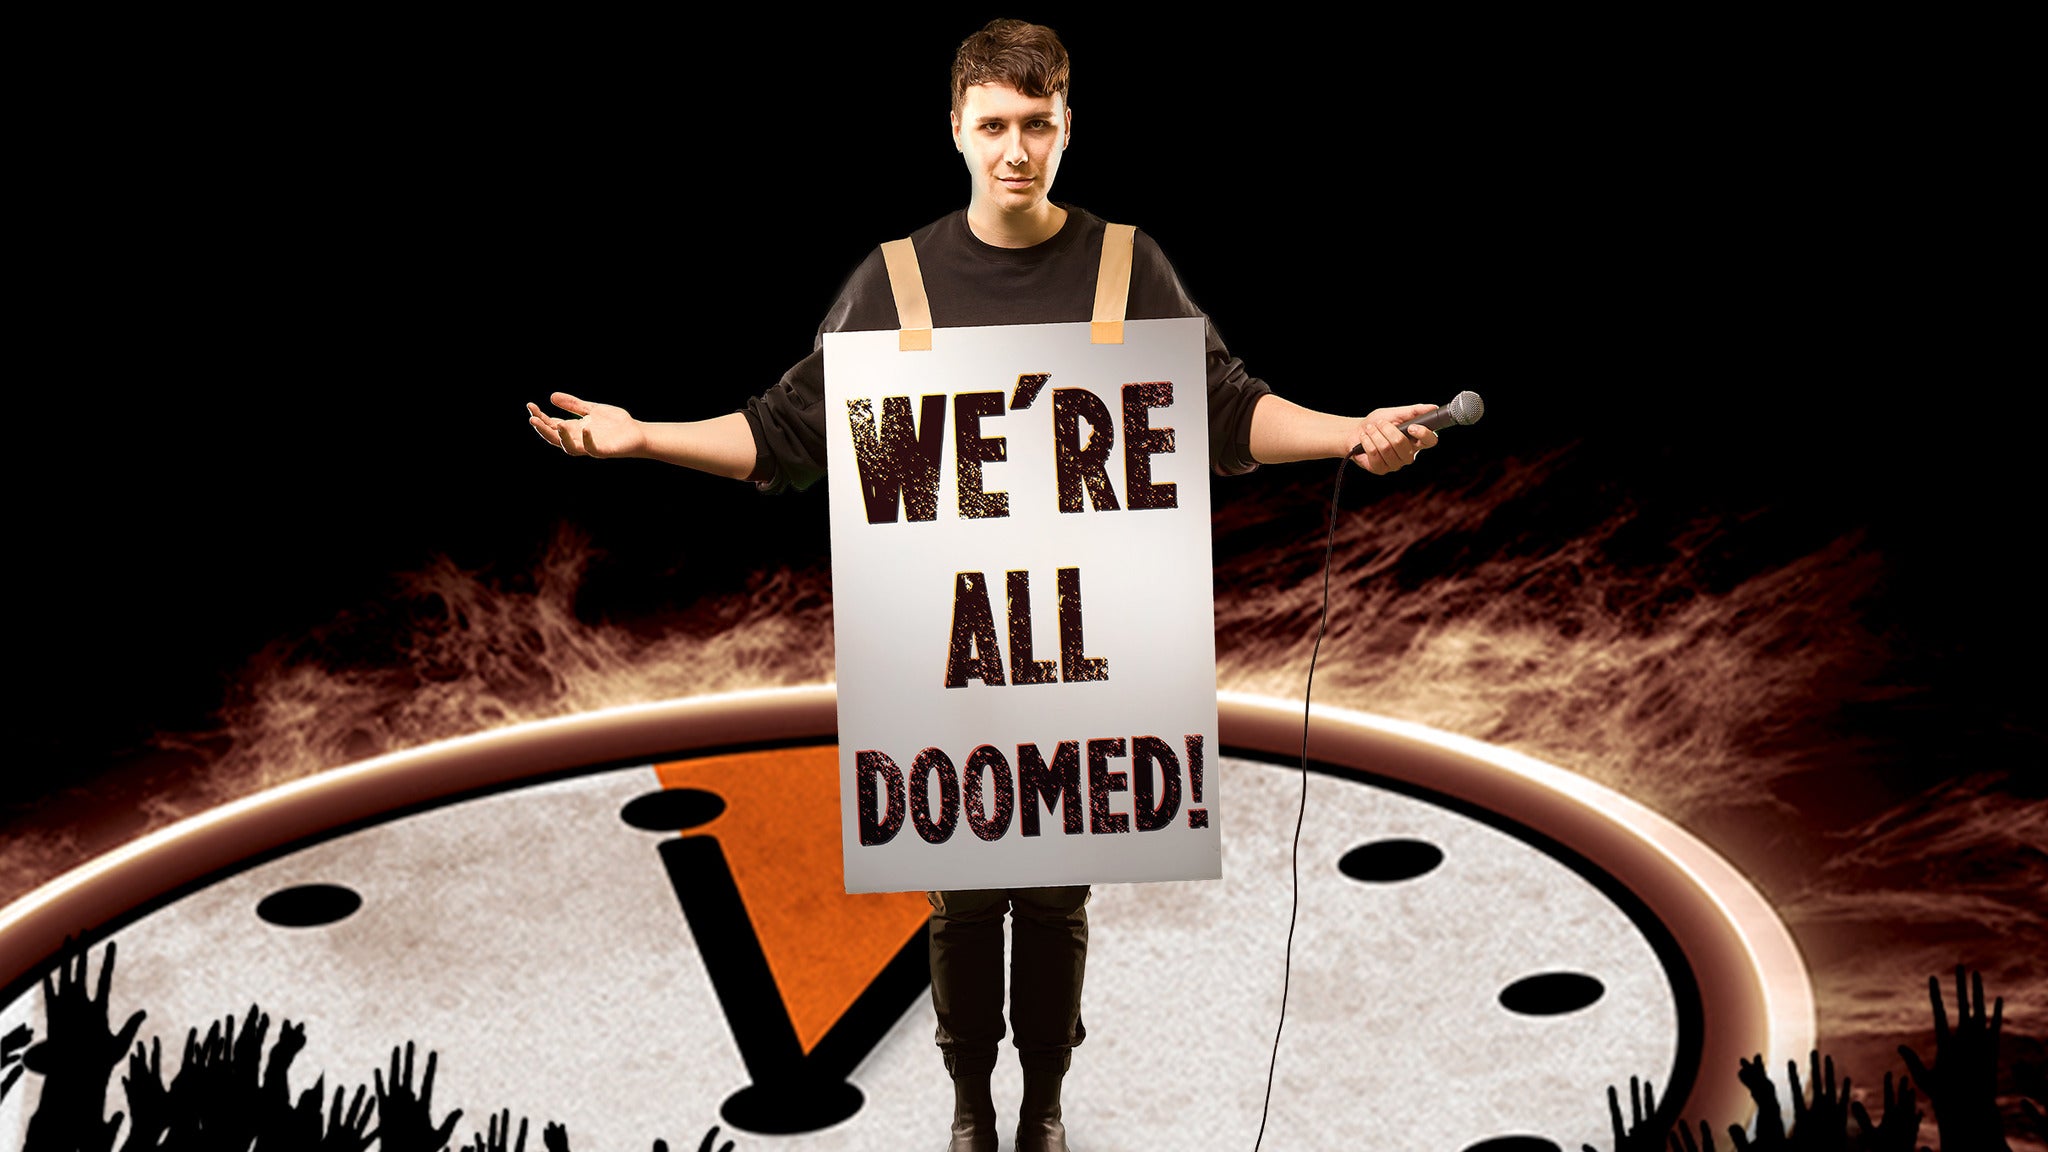 Daniel Howell: We're All Doomed! at State Theatre